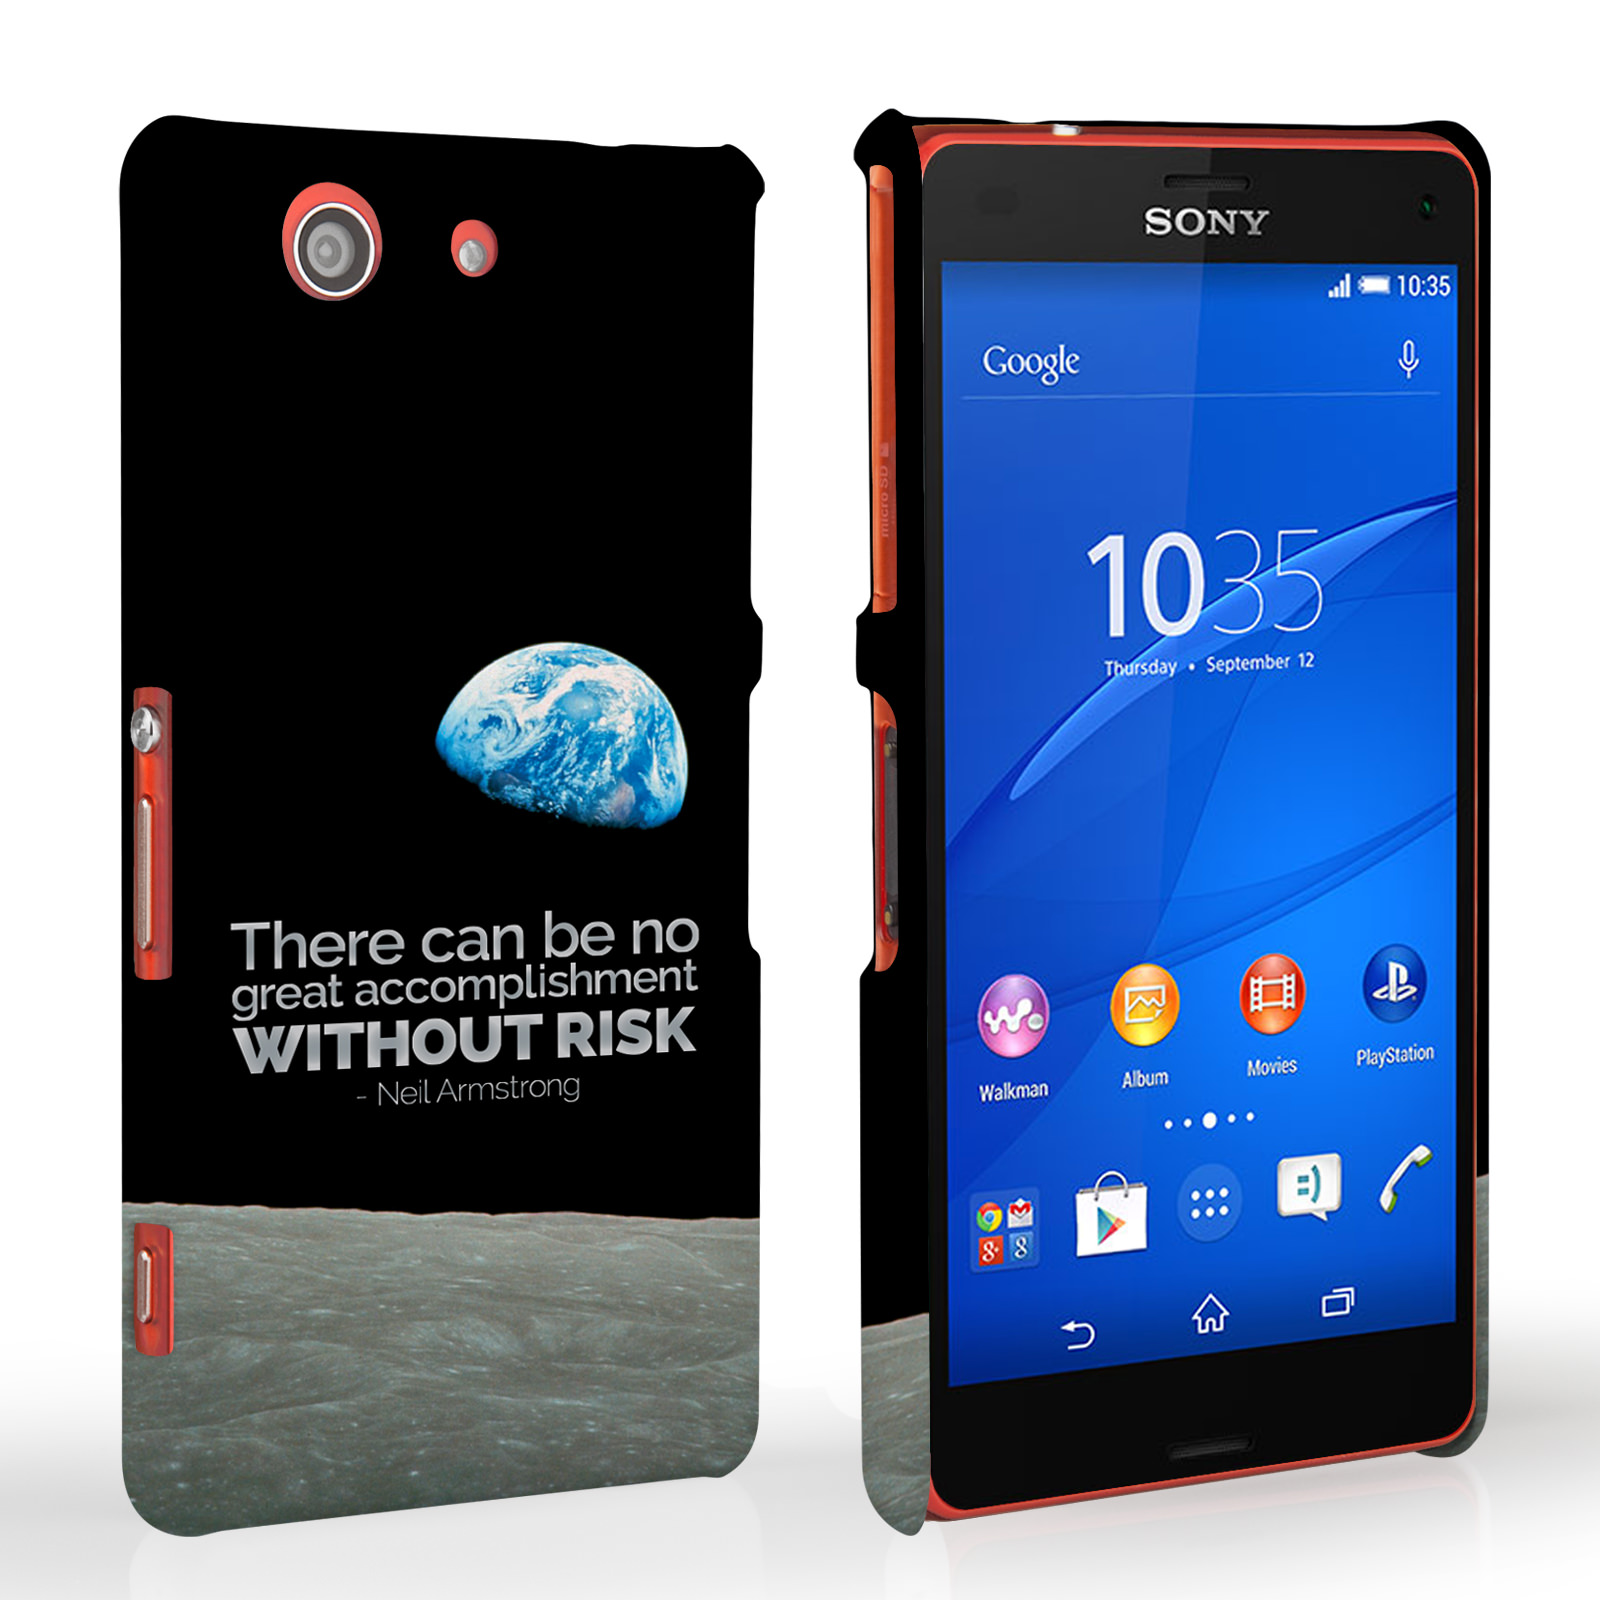 Caseflex Sony Xperia Z3 Compact Neil Armstrong Quote Case